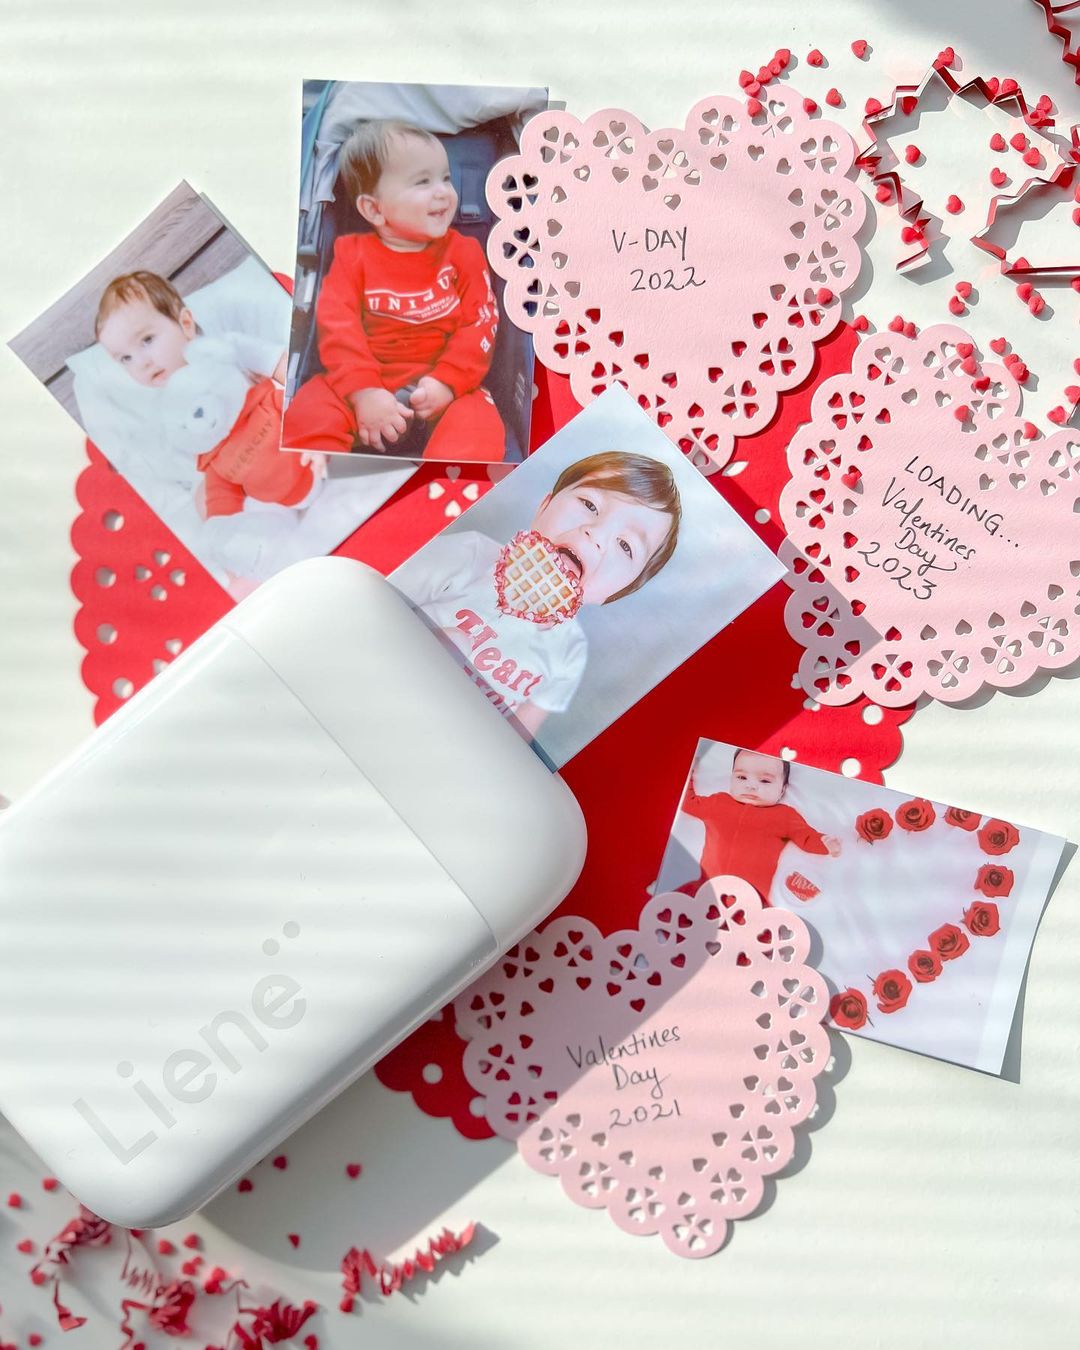 Printing in Style: The Sleek Designs of Portable Instant Photo Printers